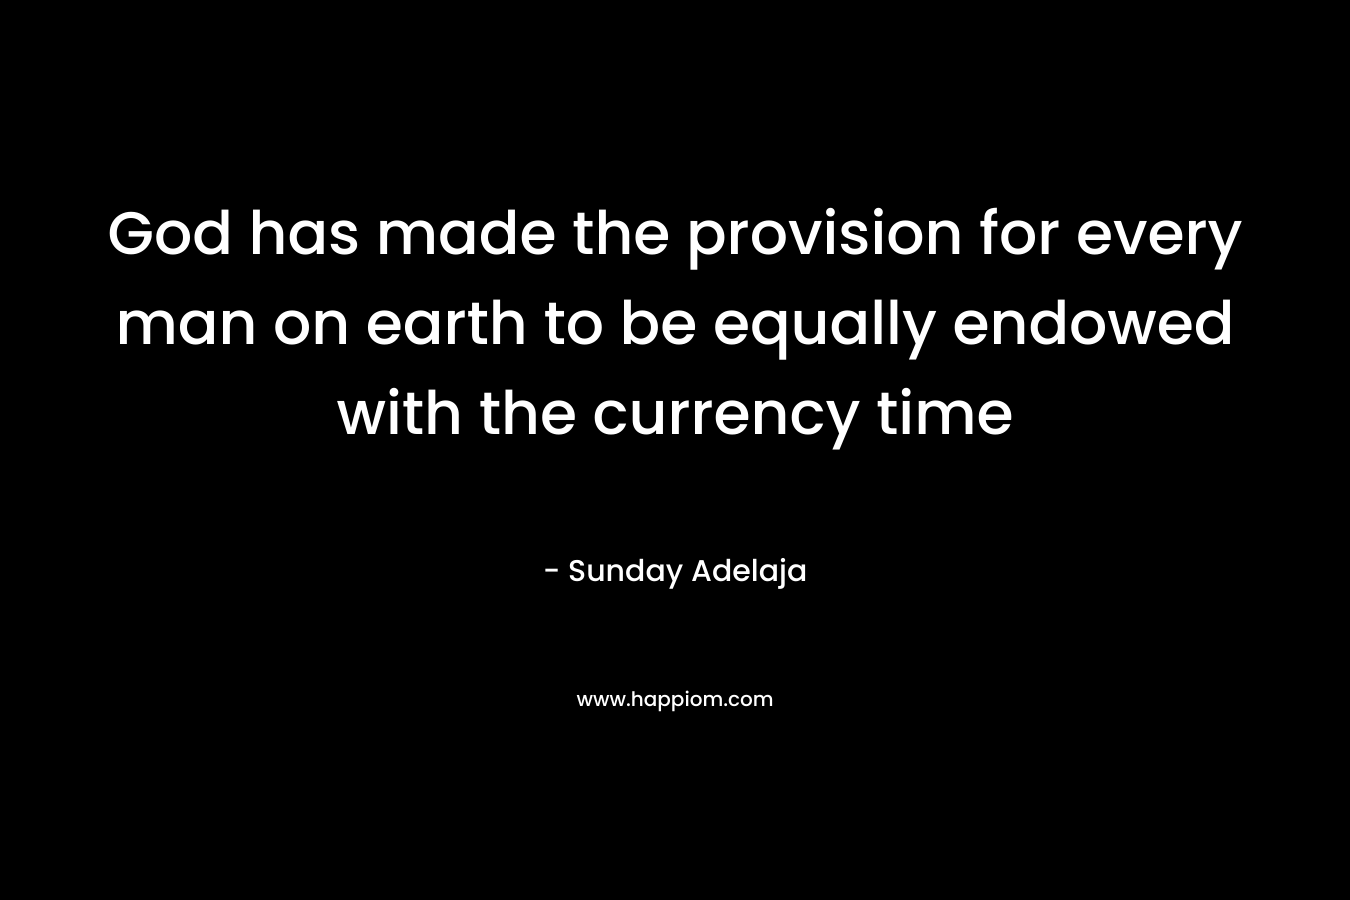 God has made the provision for every man on earth to be equally endowed with the currency time – Sunday Adelaja